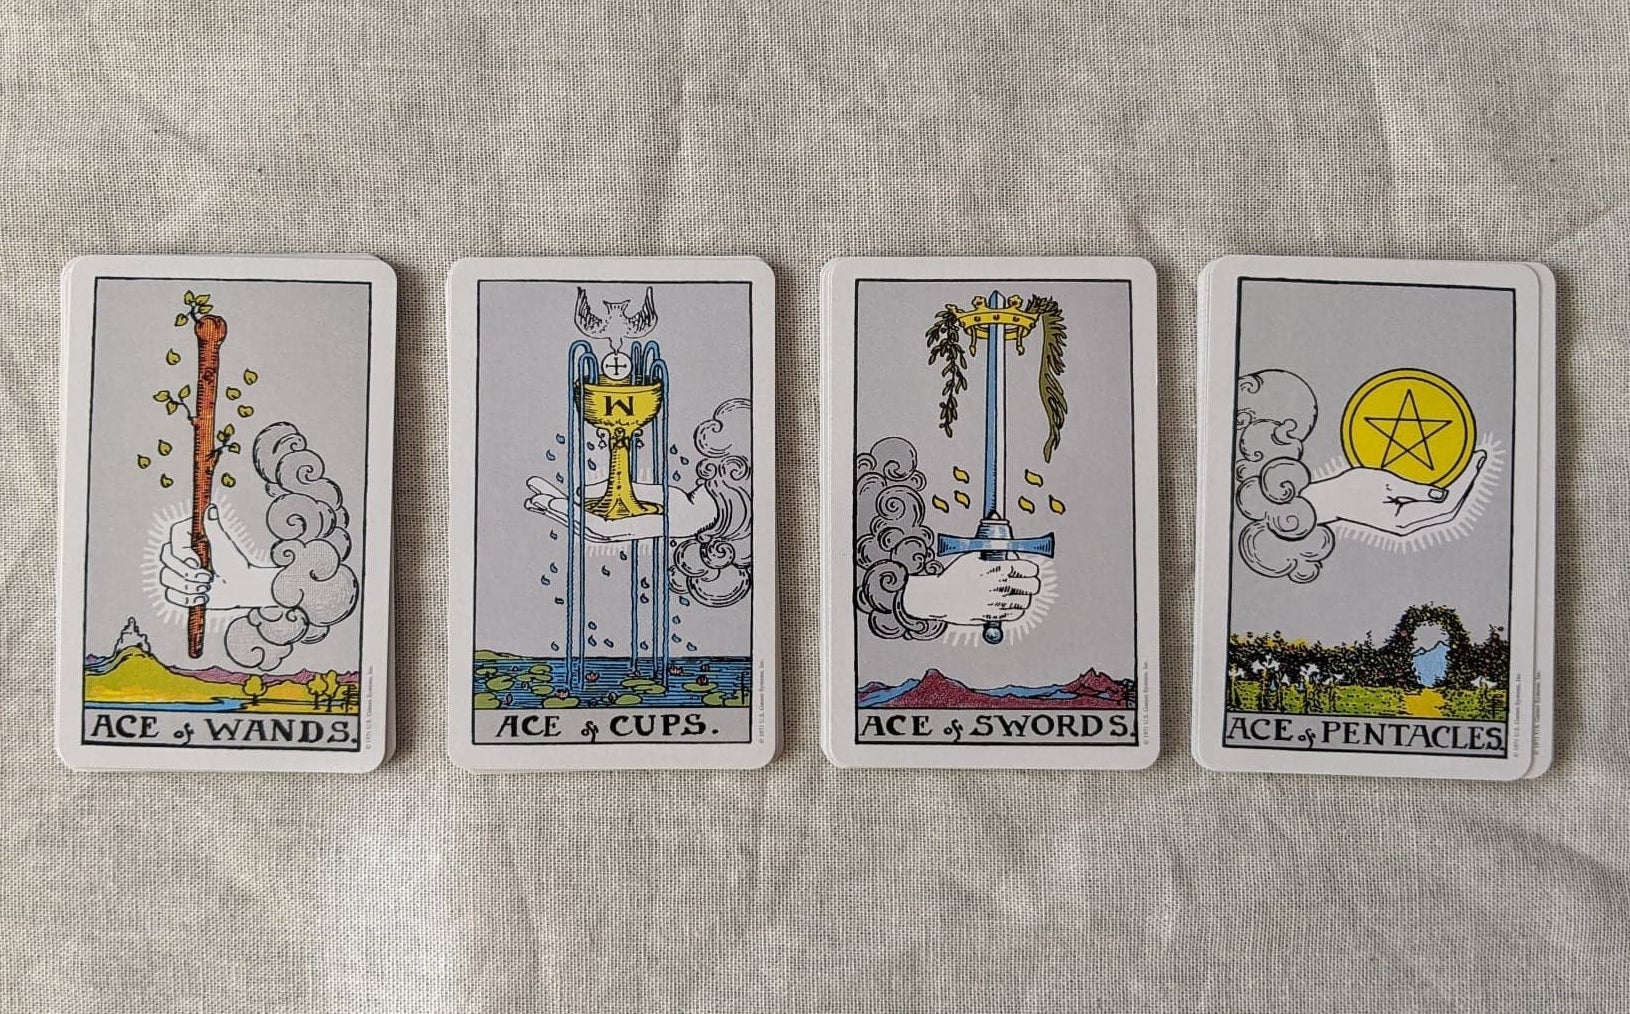 The four suits of the Rider-Waite deck lay in four decks, face up, showing the ace of wands, of cups, of swords, and of pentacles, respectively